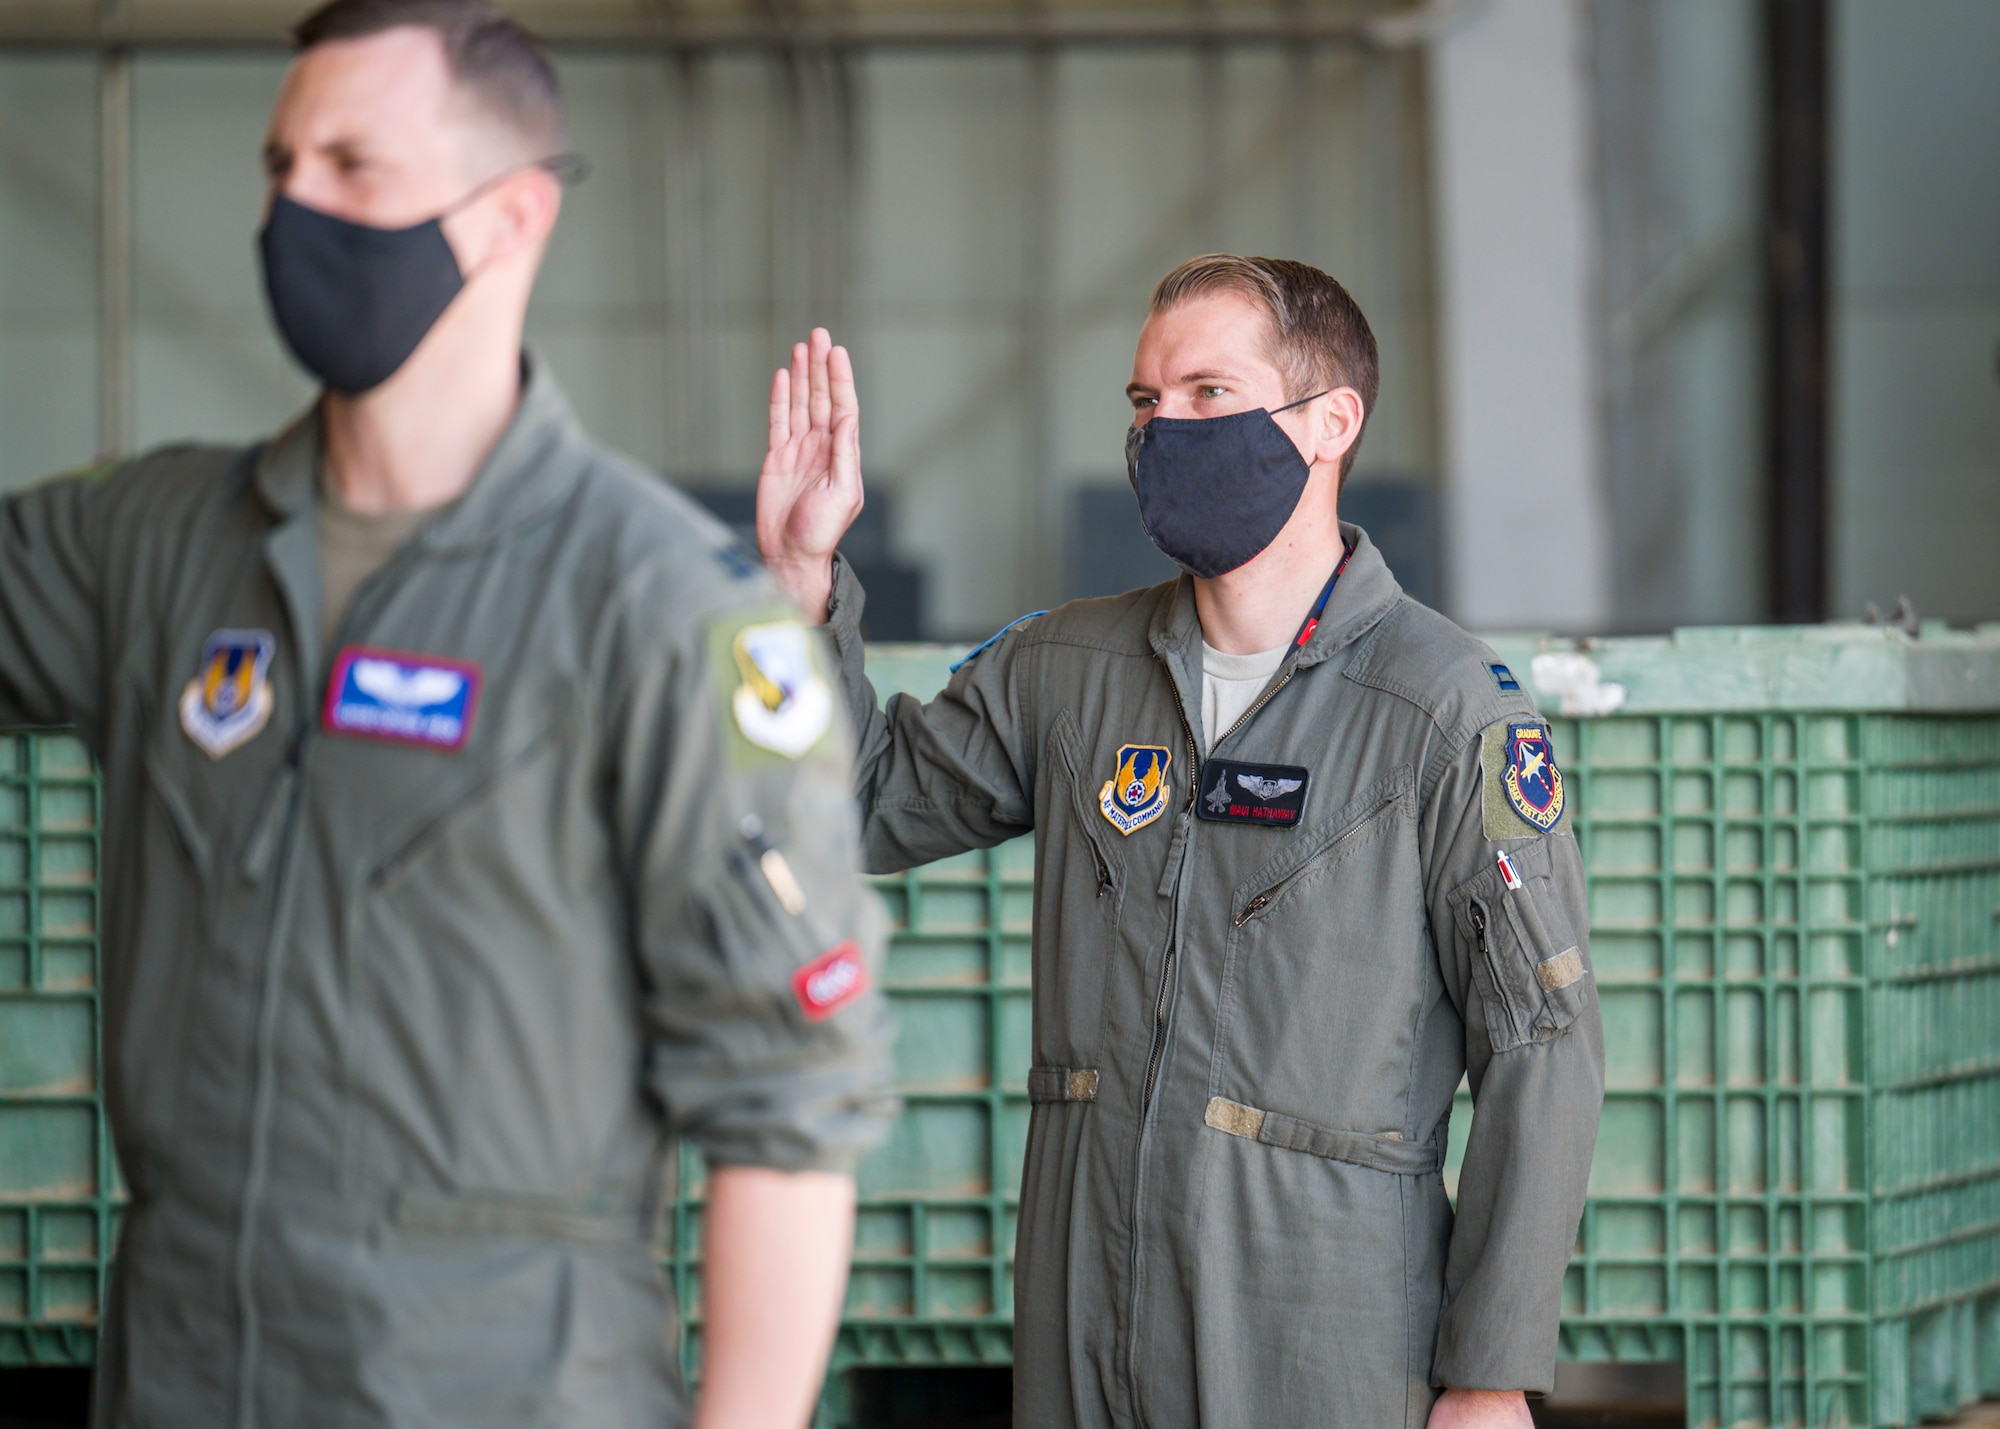 Capt. Kyle Hathaway, 461st Flight Test Squadron, originally of Portland, Oregon, recites the oath of office during a Space Force Transfer Ceremony at Edwards Air Force Base, California, Feb. 11. (Air Force photo by Giancarlo Casem)